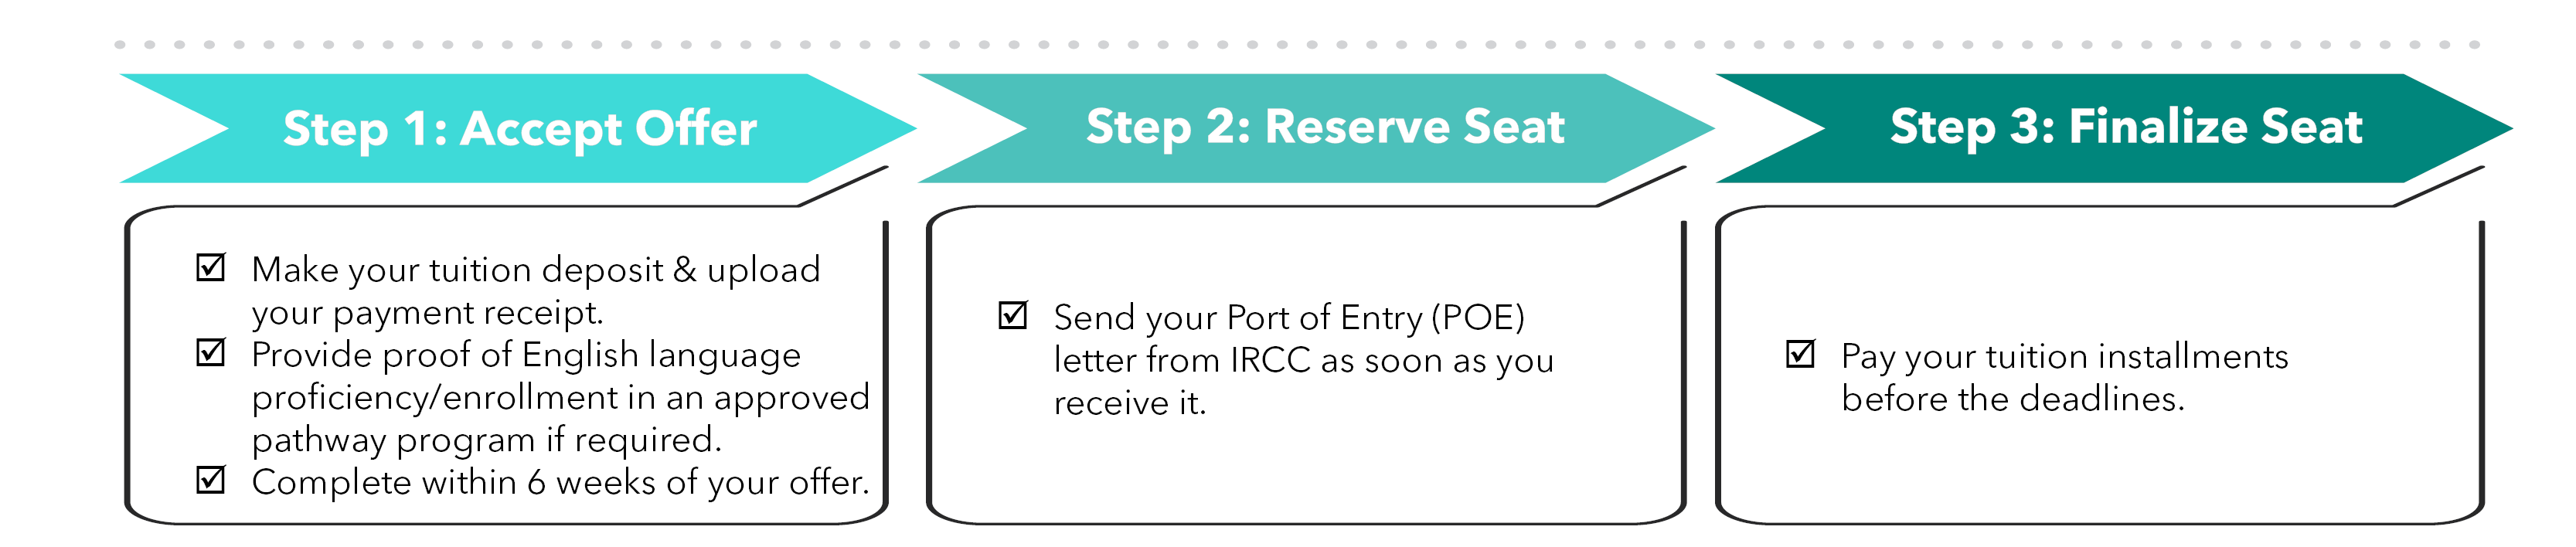 If you have completed all the steps, you will be notified that you have finalized your seat